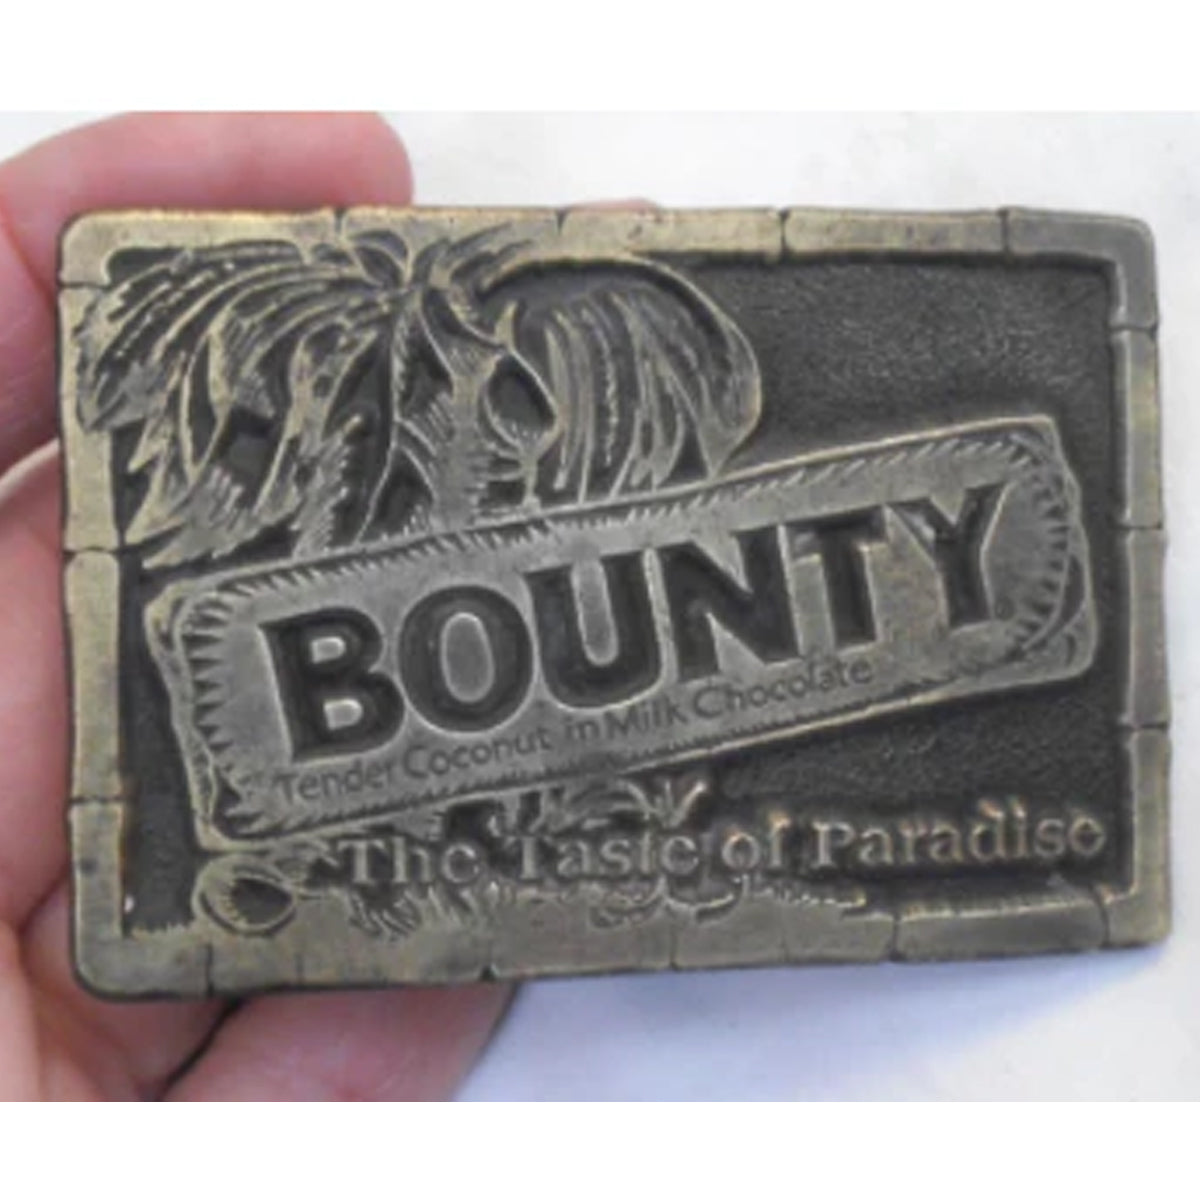 Bounty Chocolate bars, How were they created - A brief history